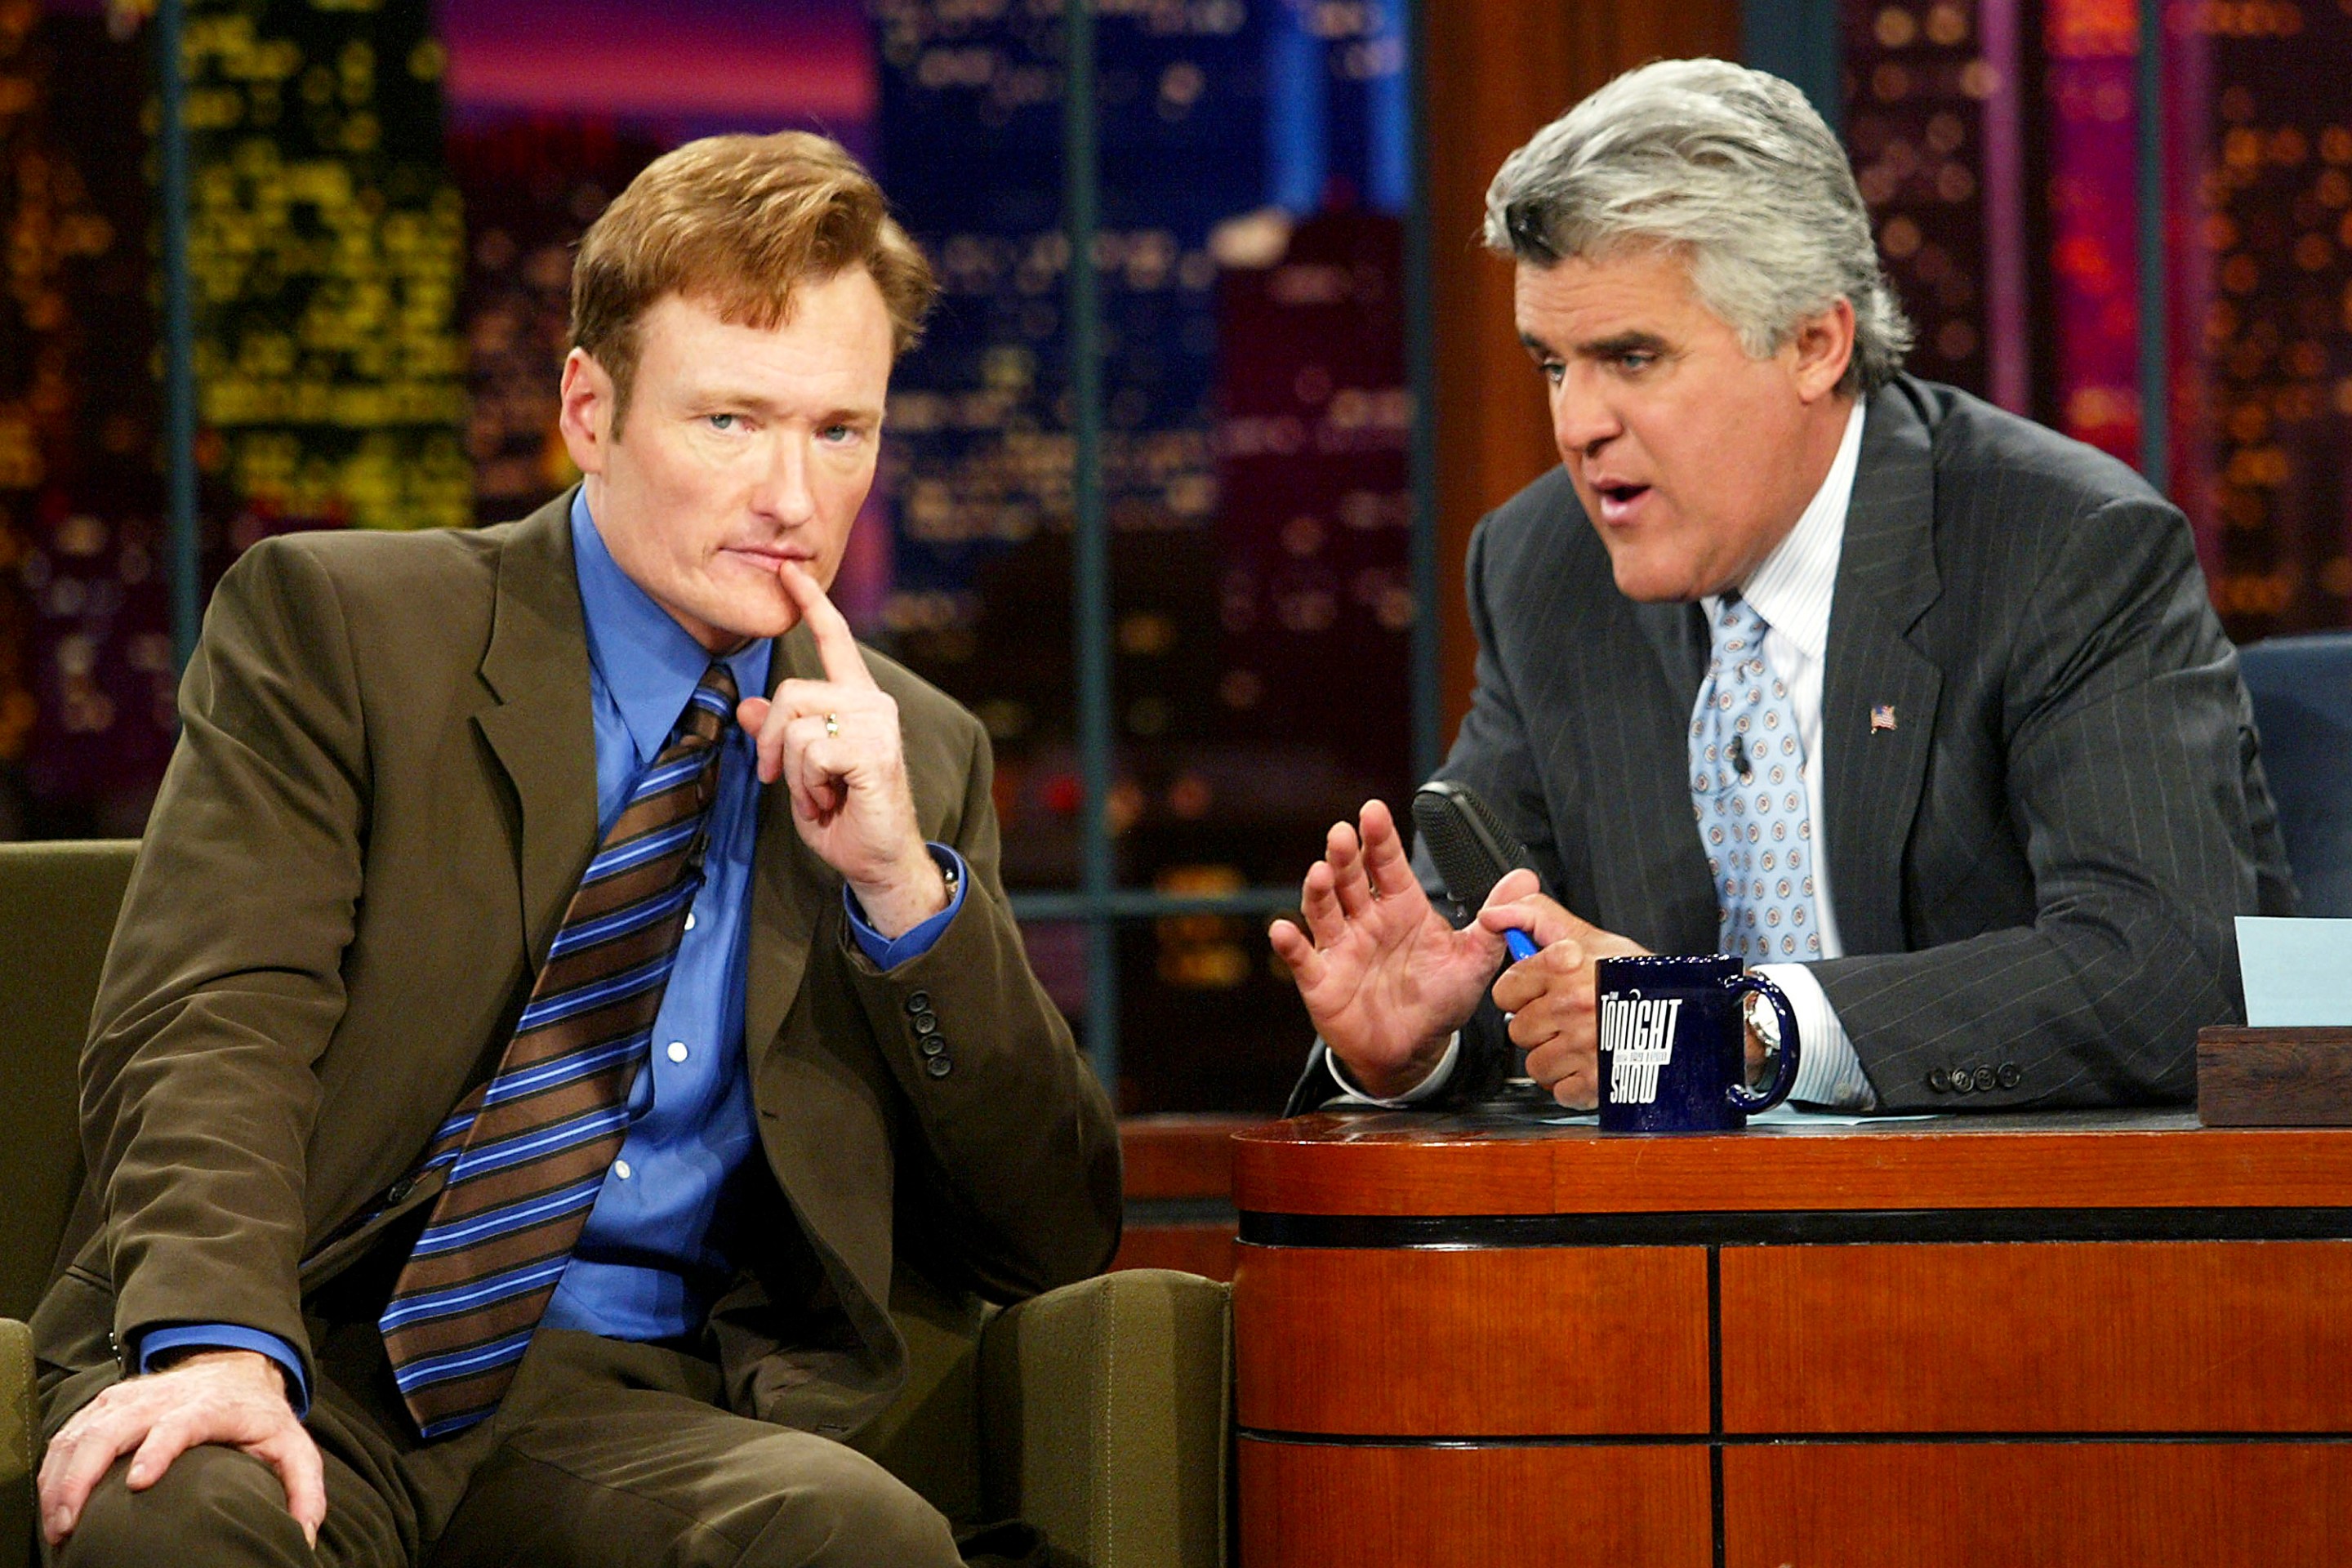 Talk show host Conan O'Brien appears on "The Tonight Show with Jay Leno" at the NBC Studios on September 5, 2003 in Burbank, California.